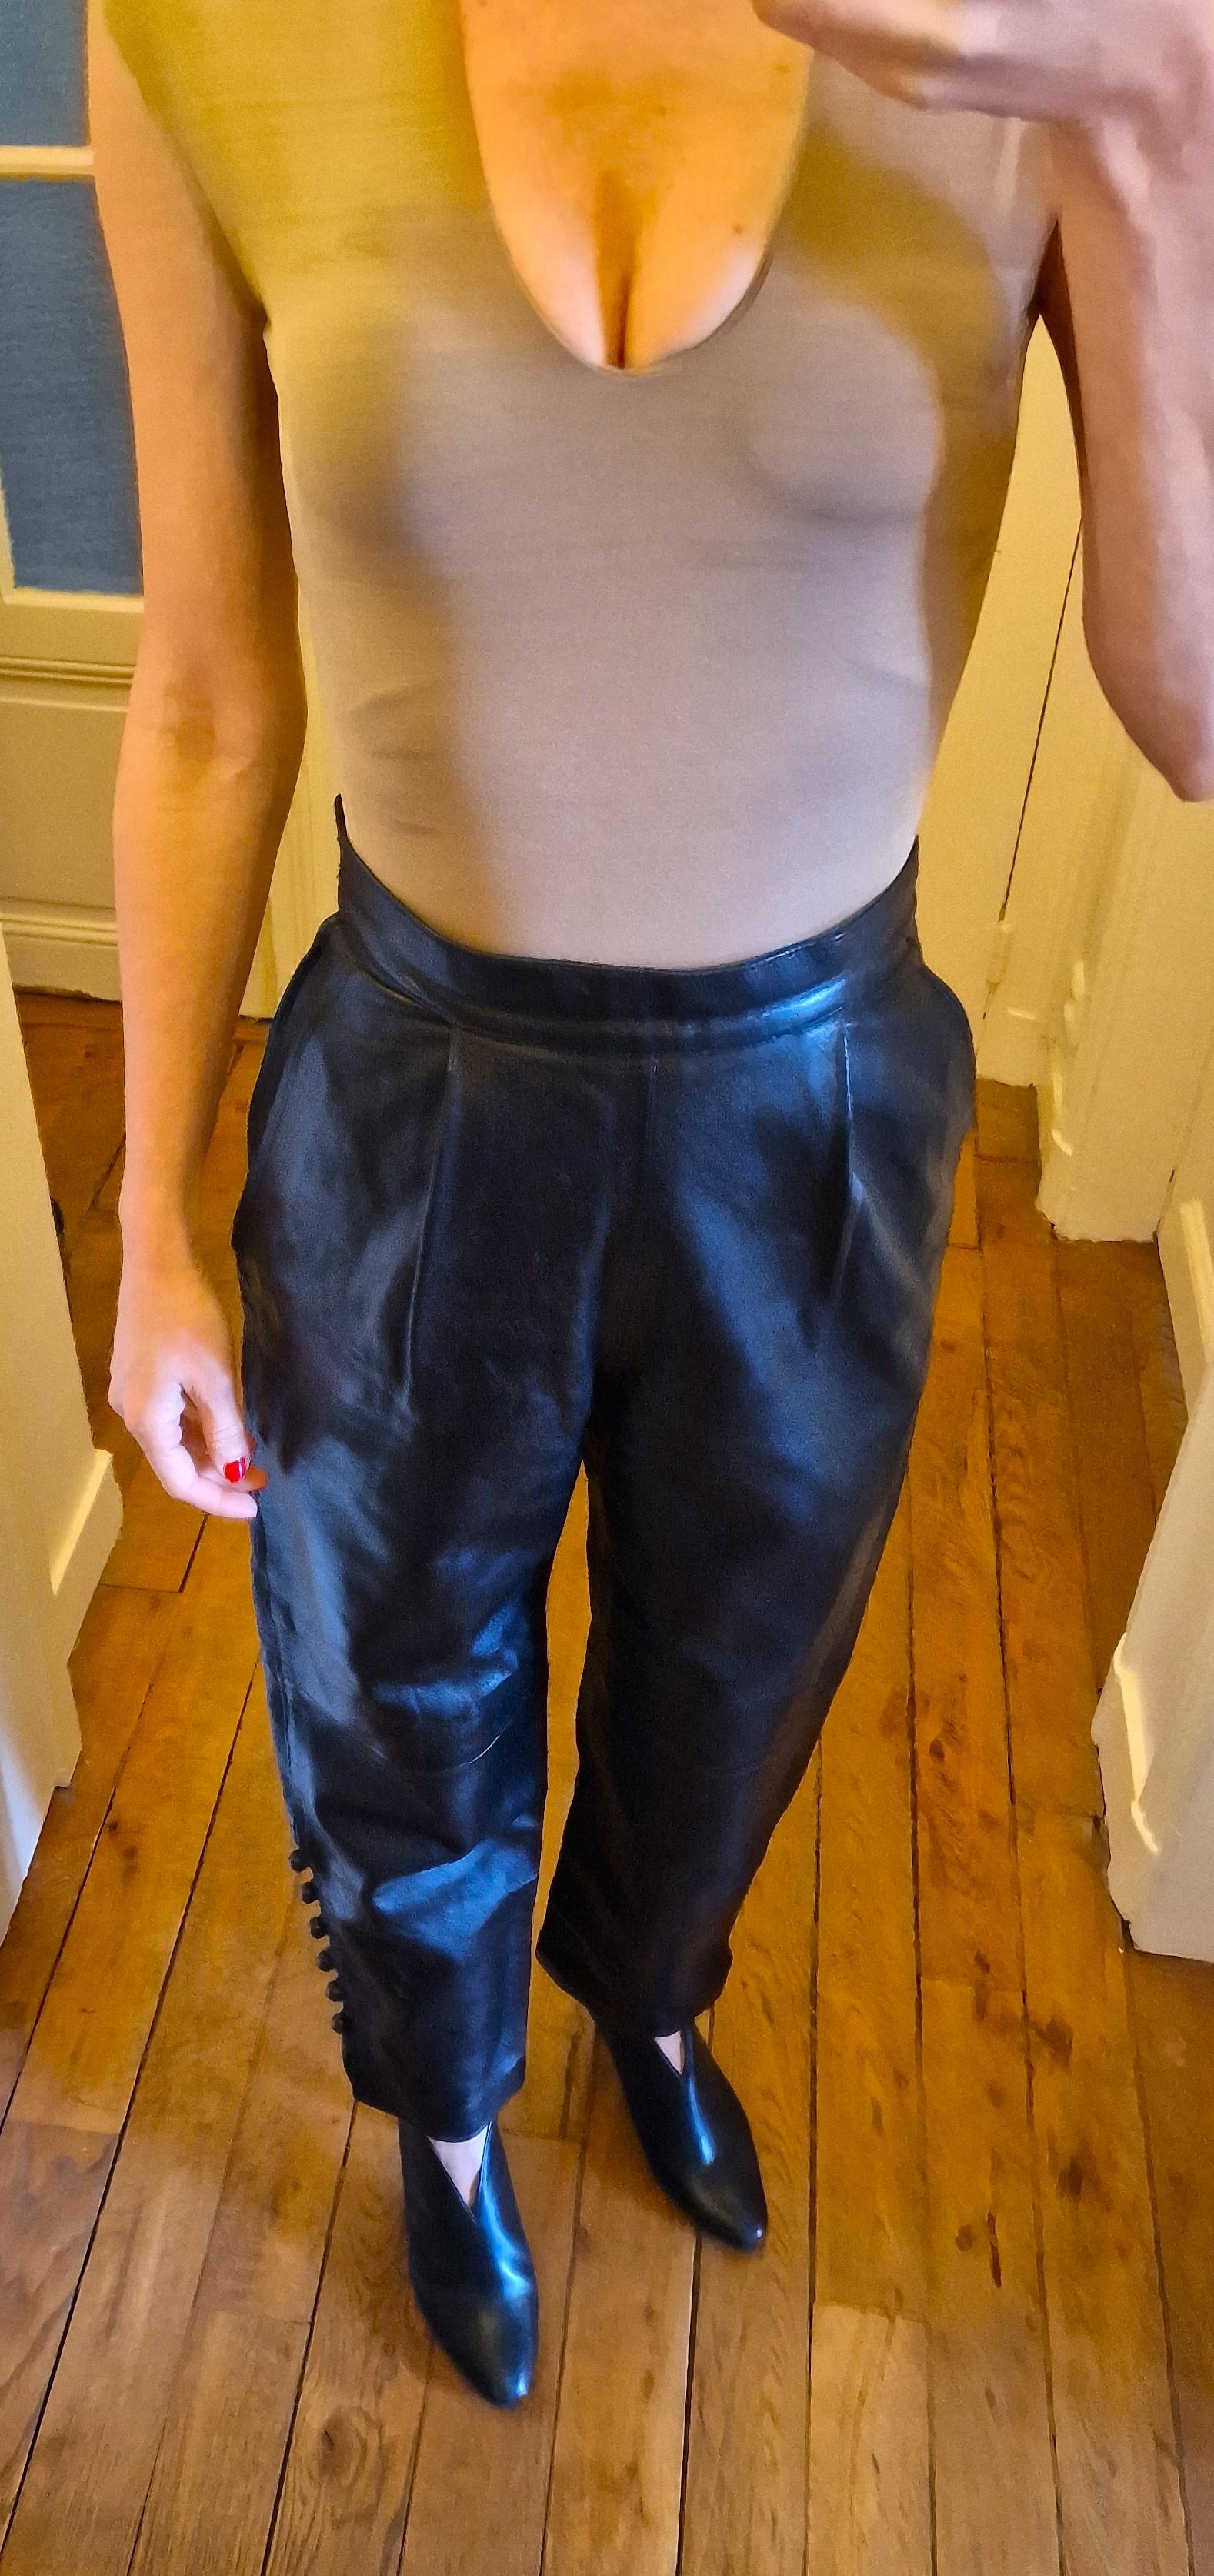 YSL Yves Saint Laurent Rive Gauche Leather High Waist Black Small Trousers Pants For Sale 10